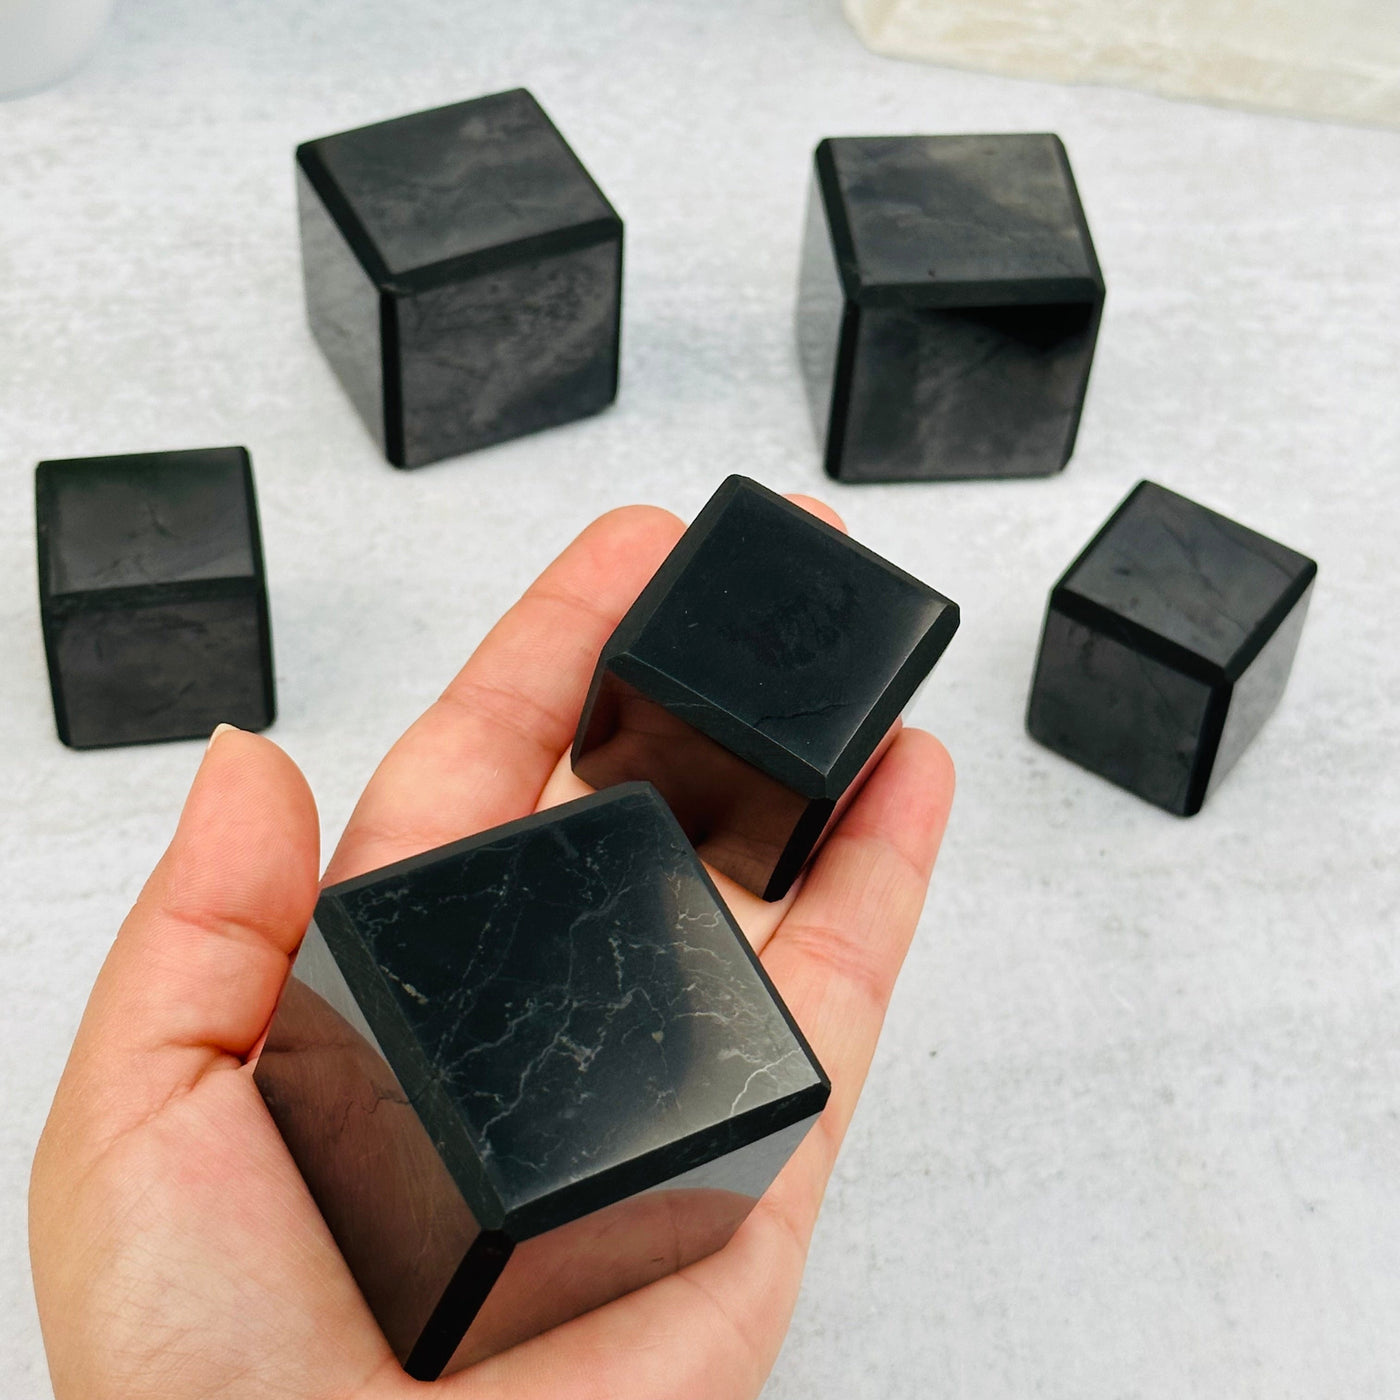 Shungite Cubes - 3cm or 4cm - in hand for size reference 